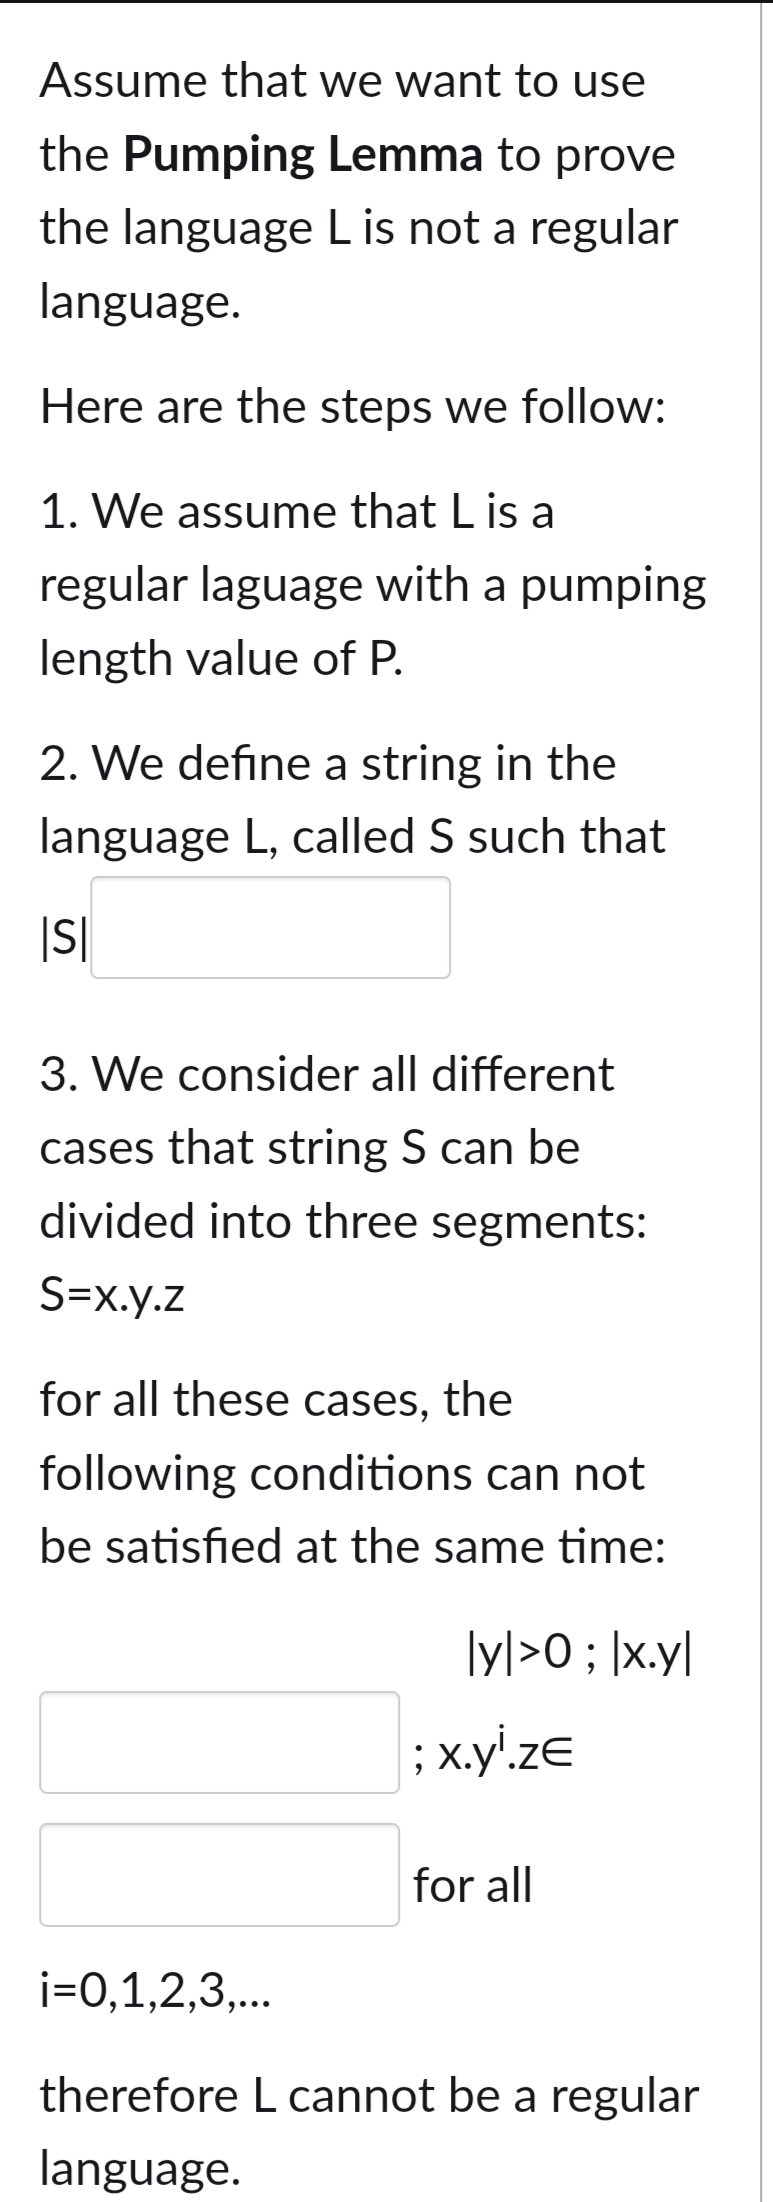 Assume that we want to use
the Pumping Lemma to prove
the language L is not a regular
language.
Here are the steps we follow:
1. We assume that L is a
regular laguage with a pumping
length value of P.
2. We define a string in the
language L, called S such that
|S|
3. We consider all different
cases that string S can be
divided into three segments:
S=x.y.z
for all these cases, the
following conditions can not
be satisfied at the same time:
|y|>0; │x.y|
; x.yi.ze
for all
i=0,1,2,3,...
therefore L cannot be a regular
language.